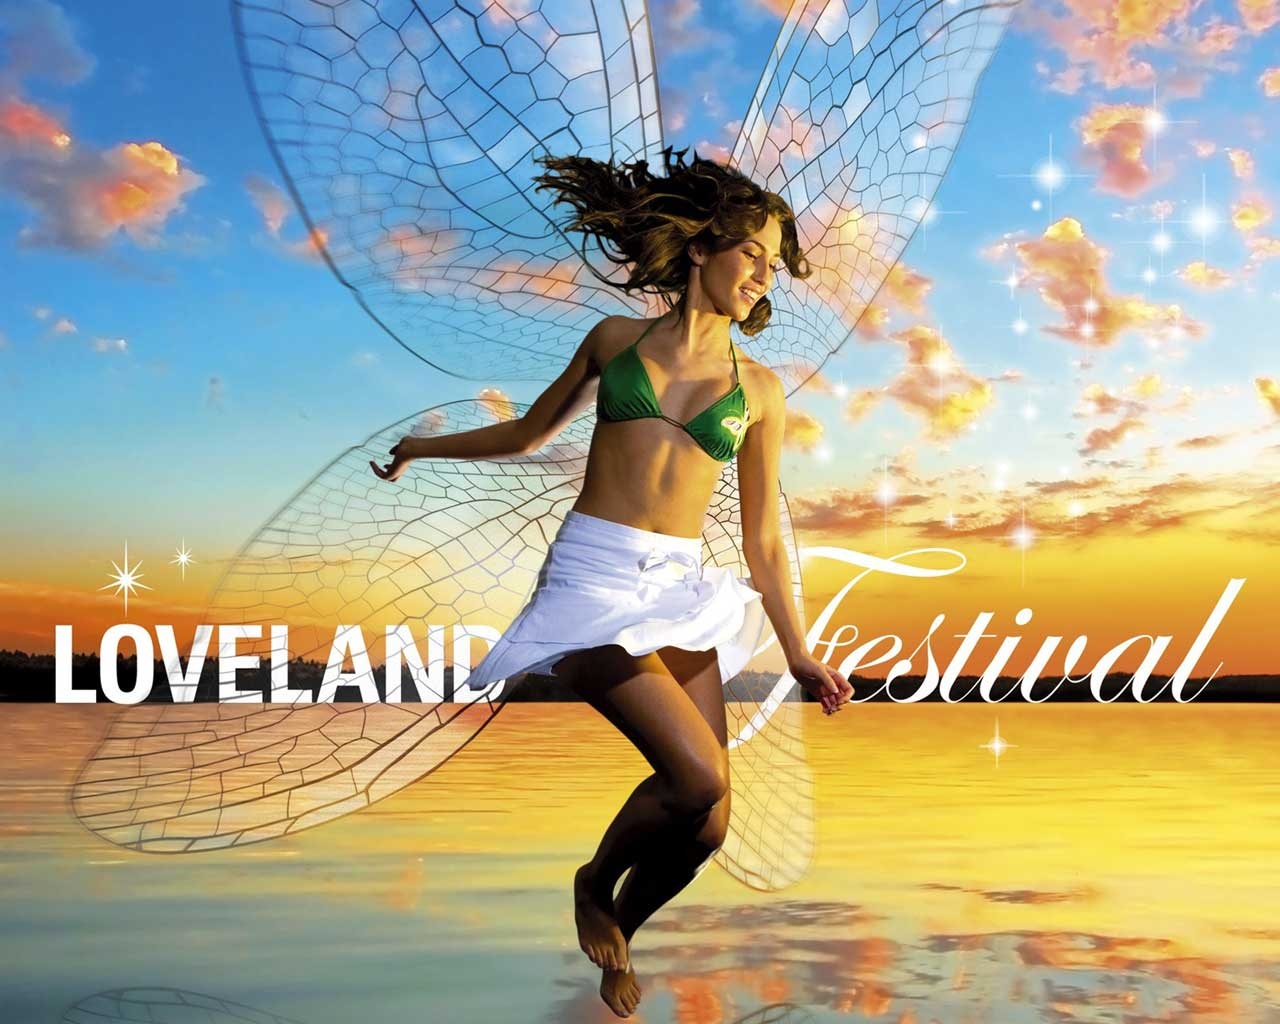 Loveland Festival HD and Wide Wallpapers